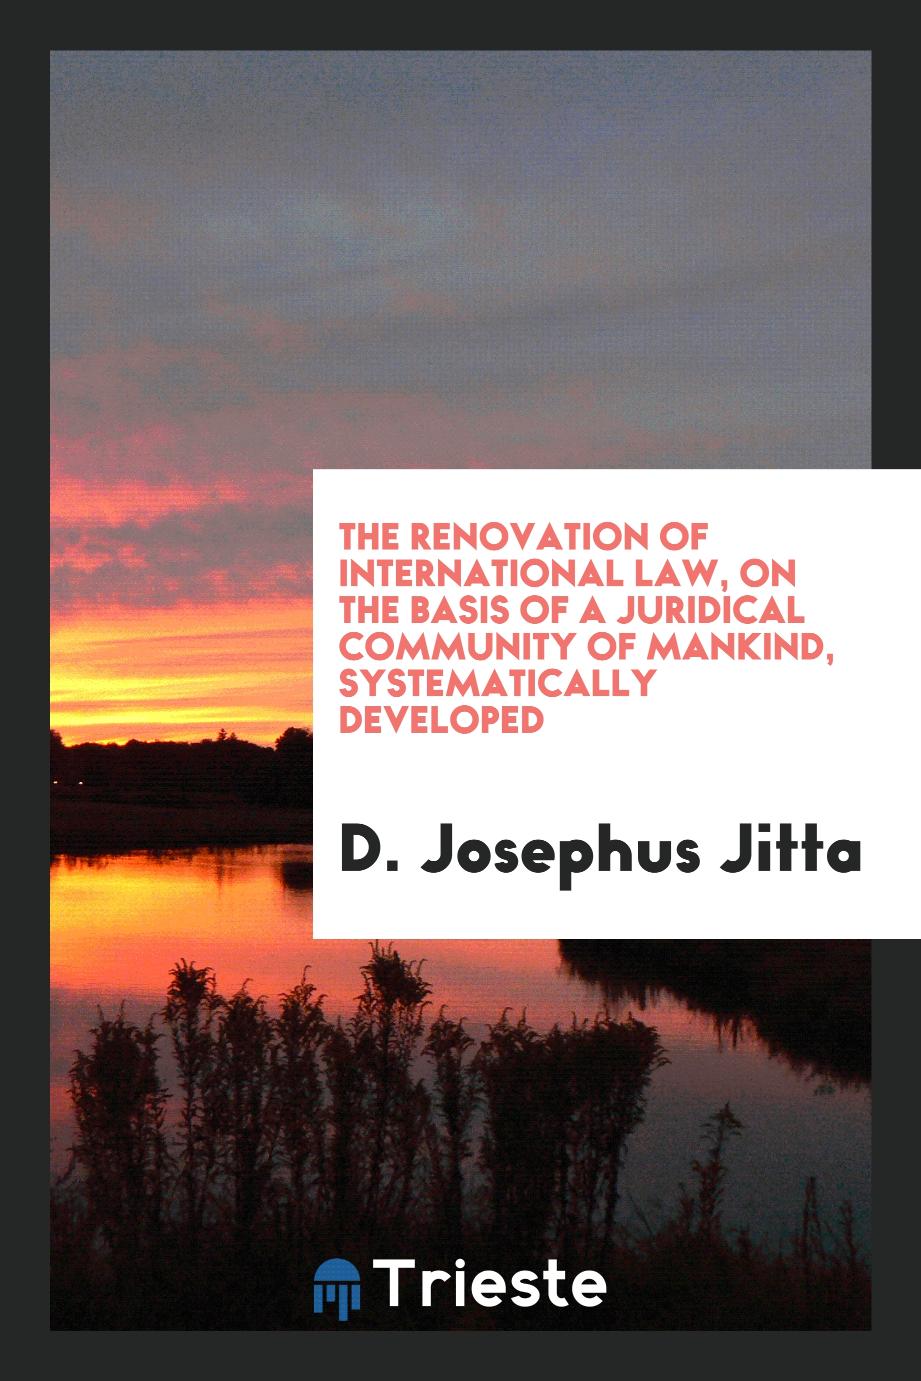 The renovation of international law, on the basis of a juridical community of mankind, systematically developed